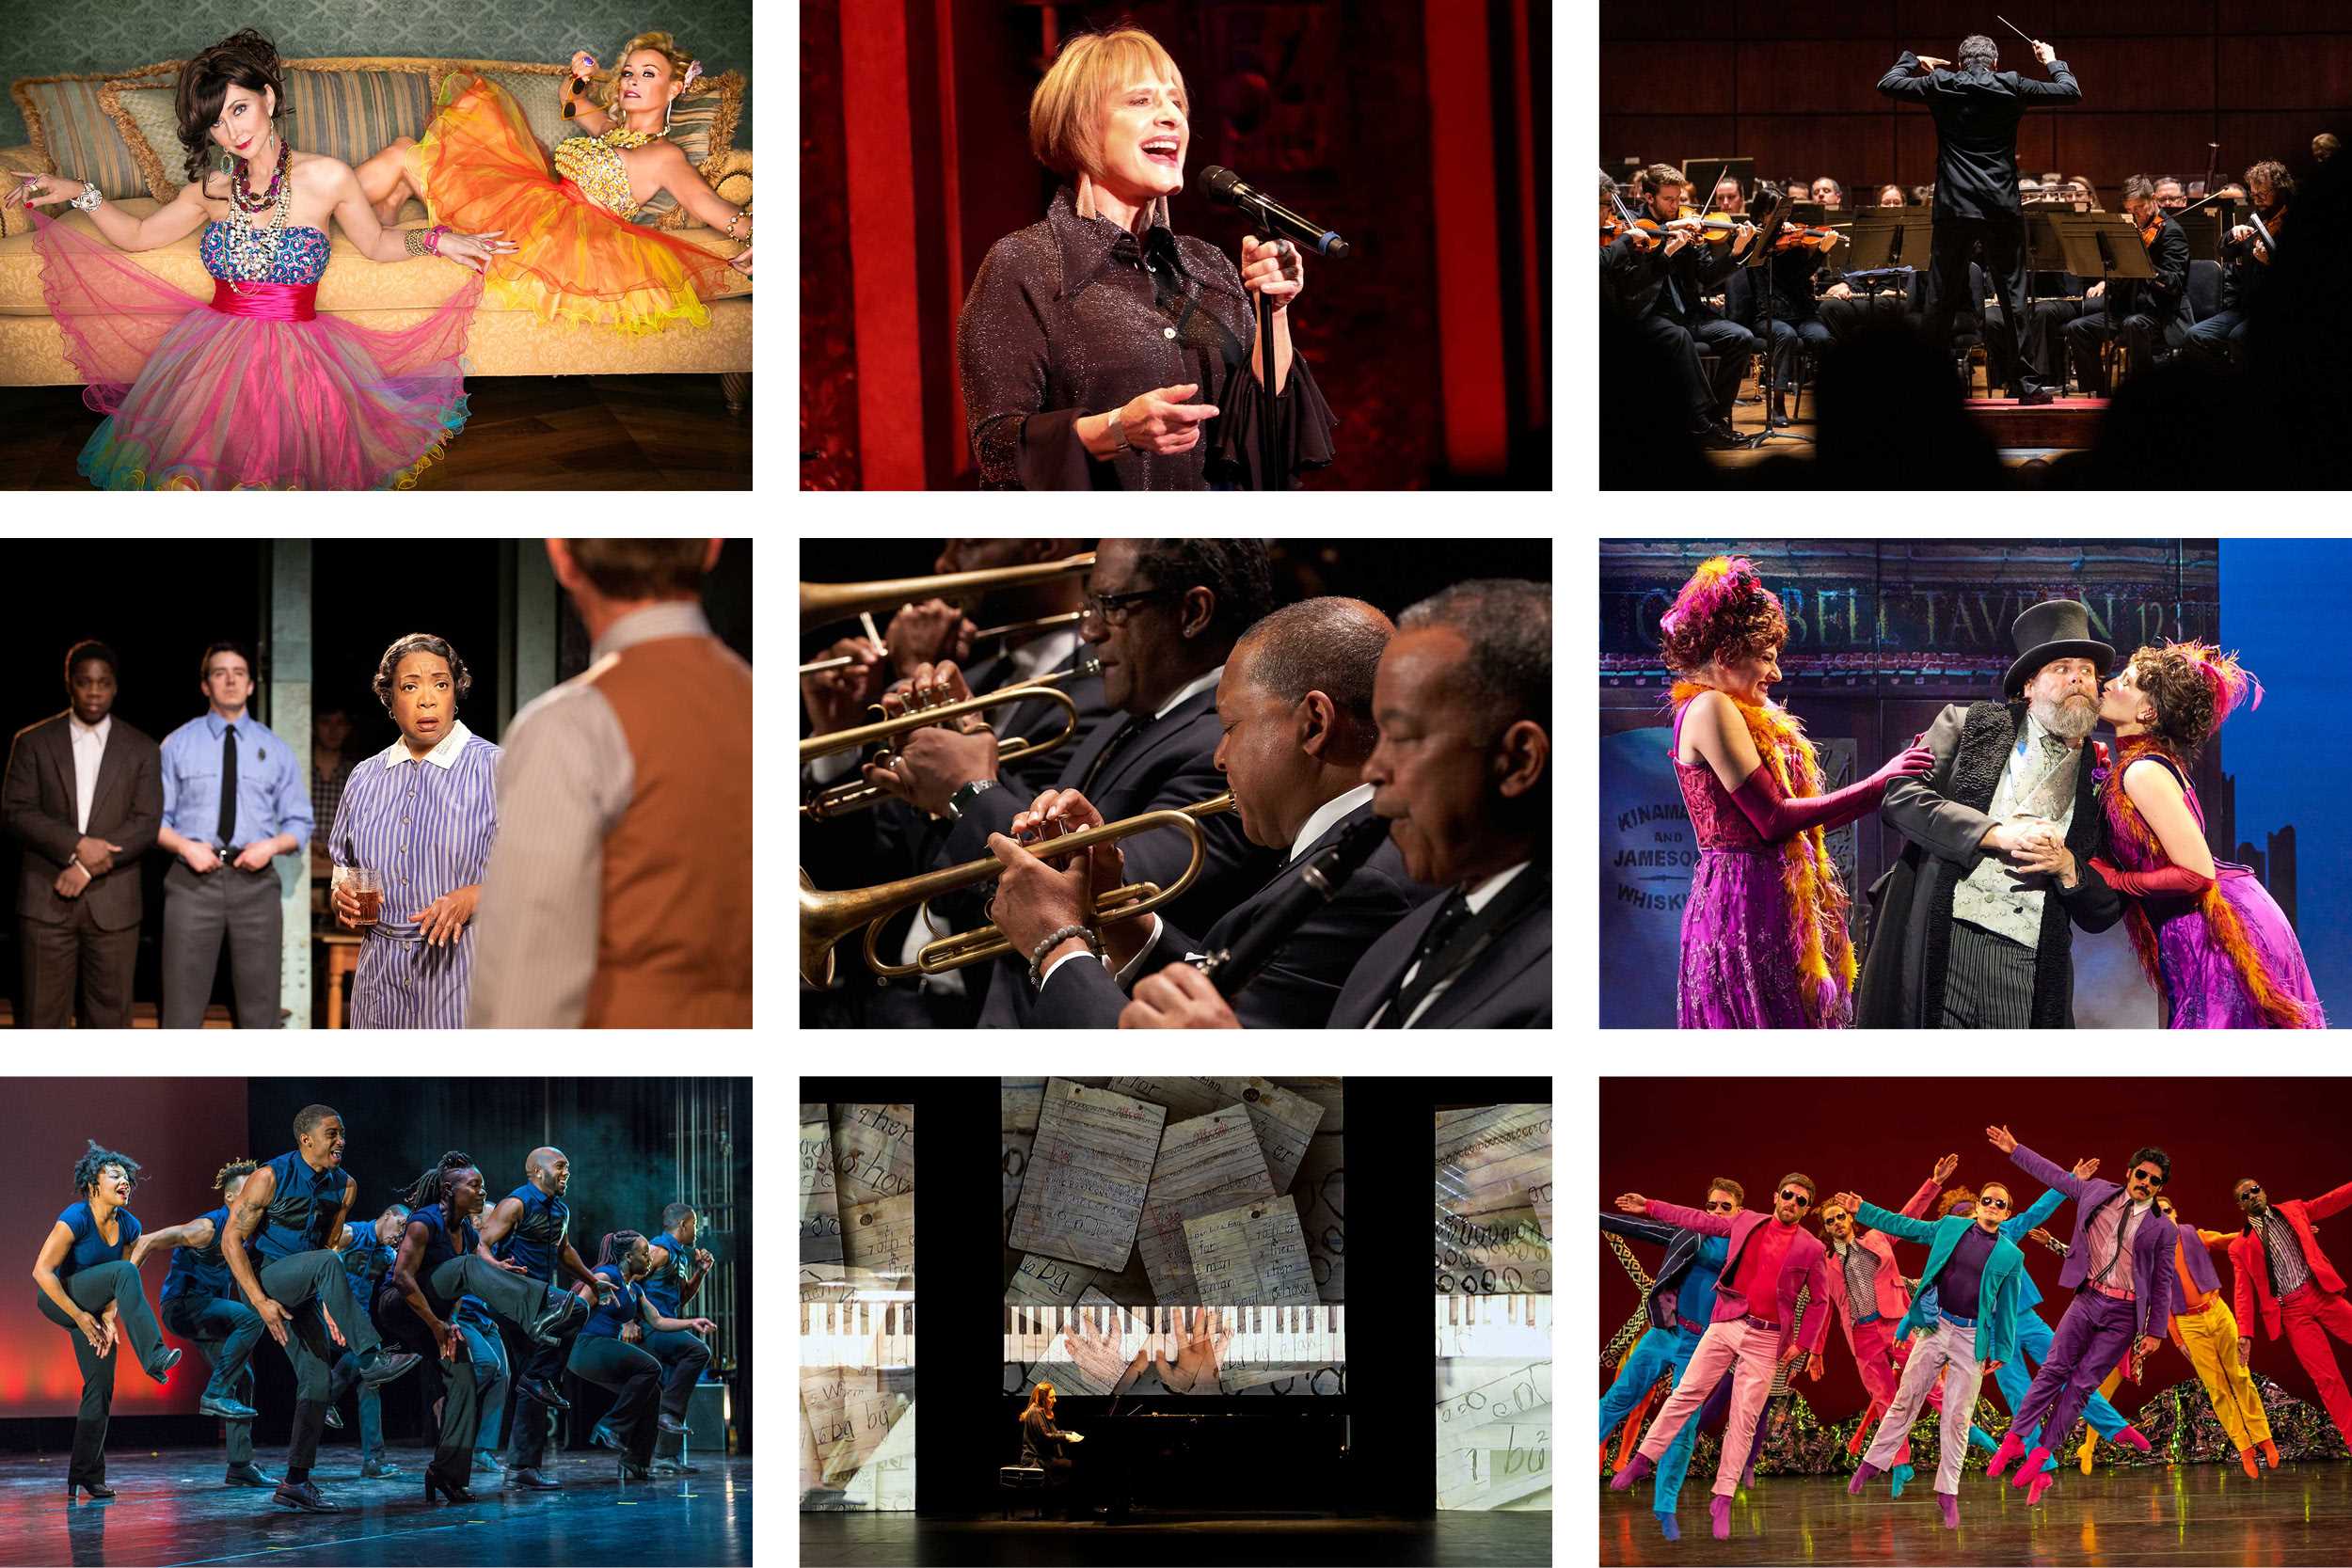 A collage of musical and theater performers